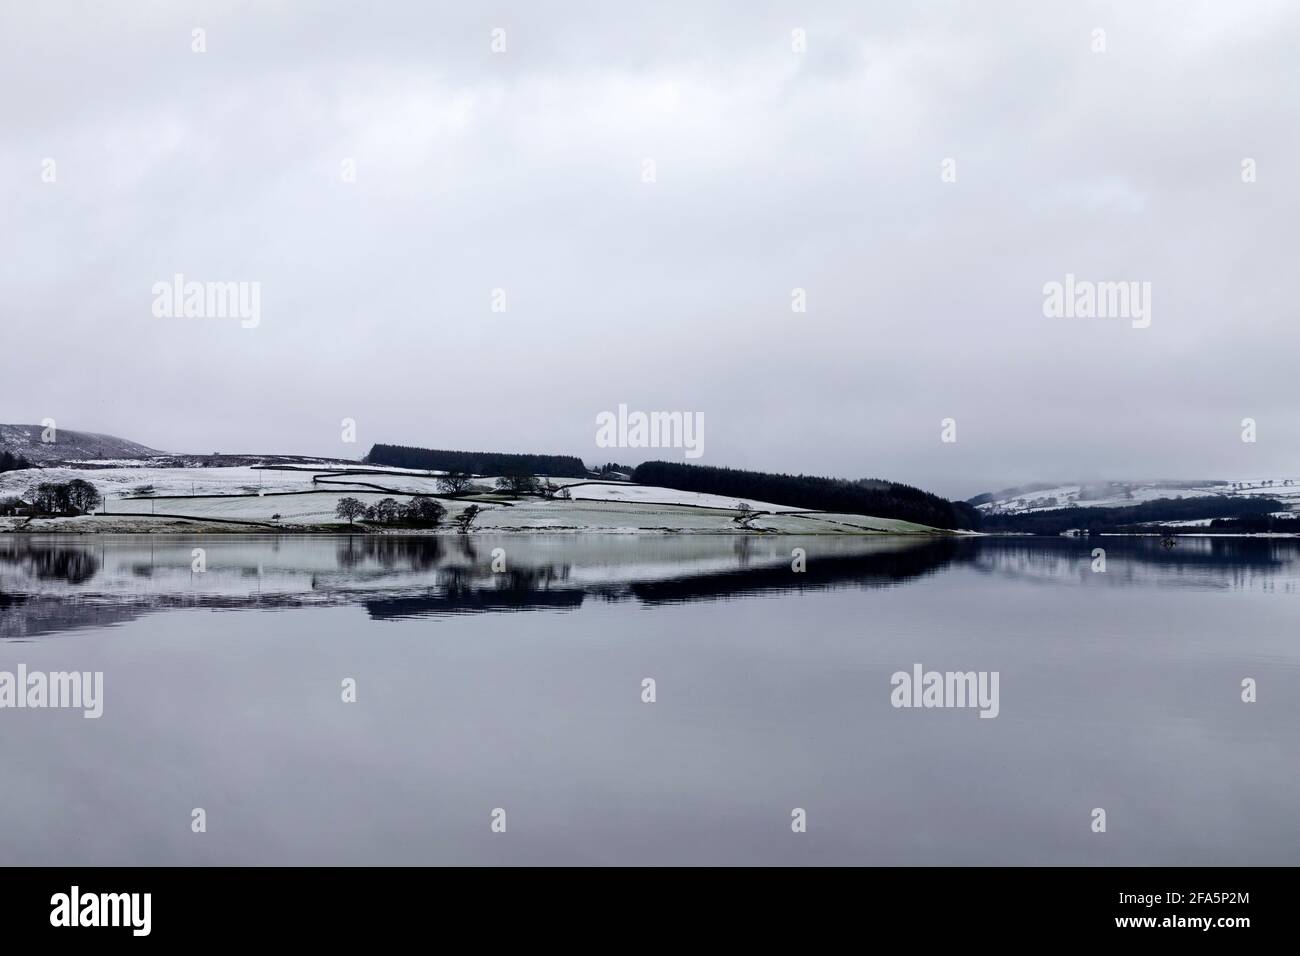 Winter day at Derwent Reservoir on the border of Northumberland and County Durham in England. Derwent Waterside Park has walking and cycling routes. Stock Photo